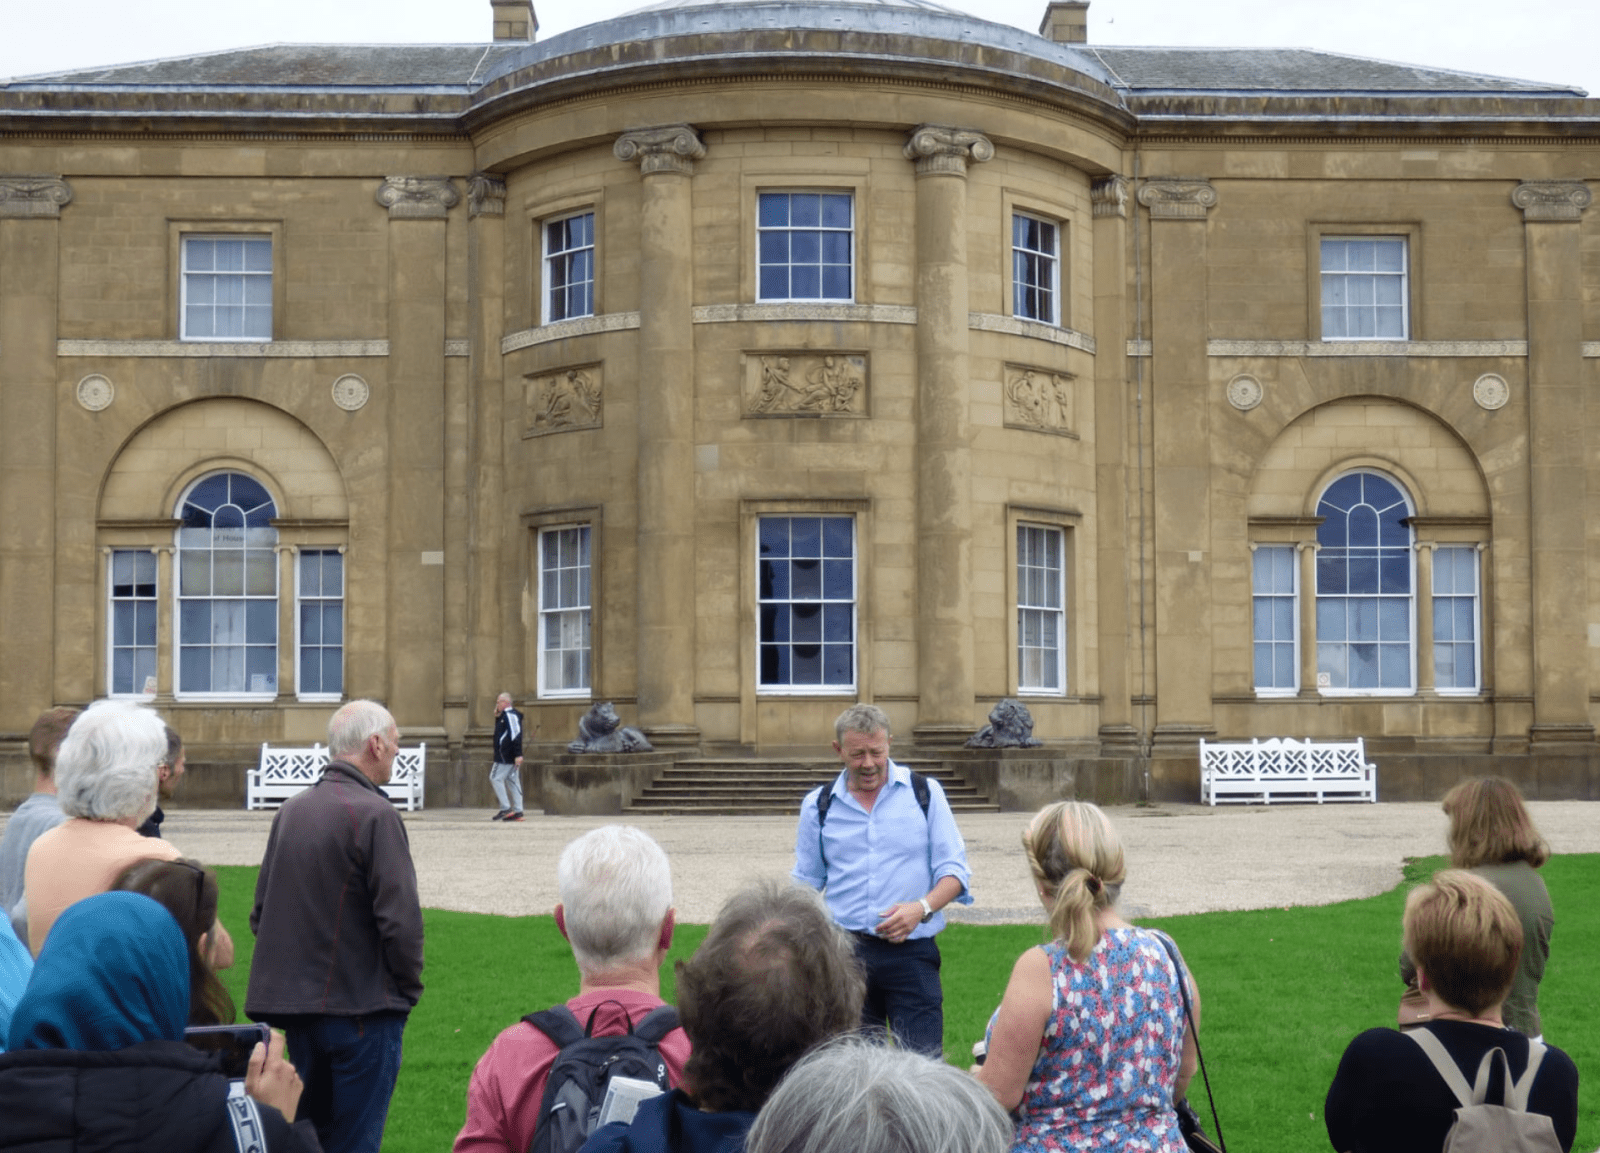 The £5 million repair of Heaton Hall is now complete &#8211; and you can book a tour, The Manc